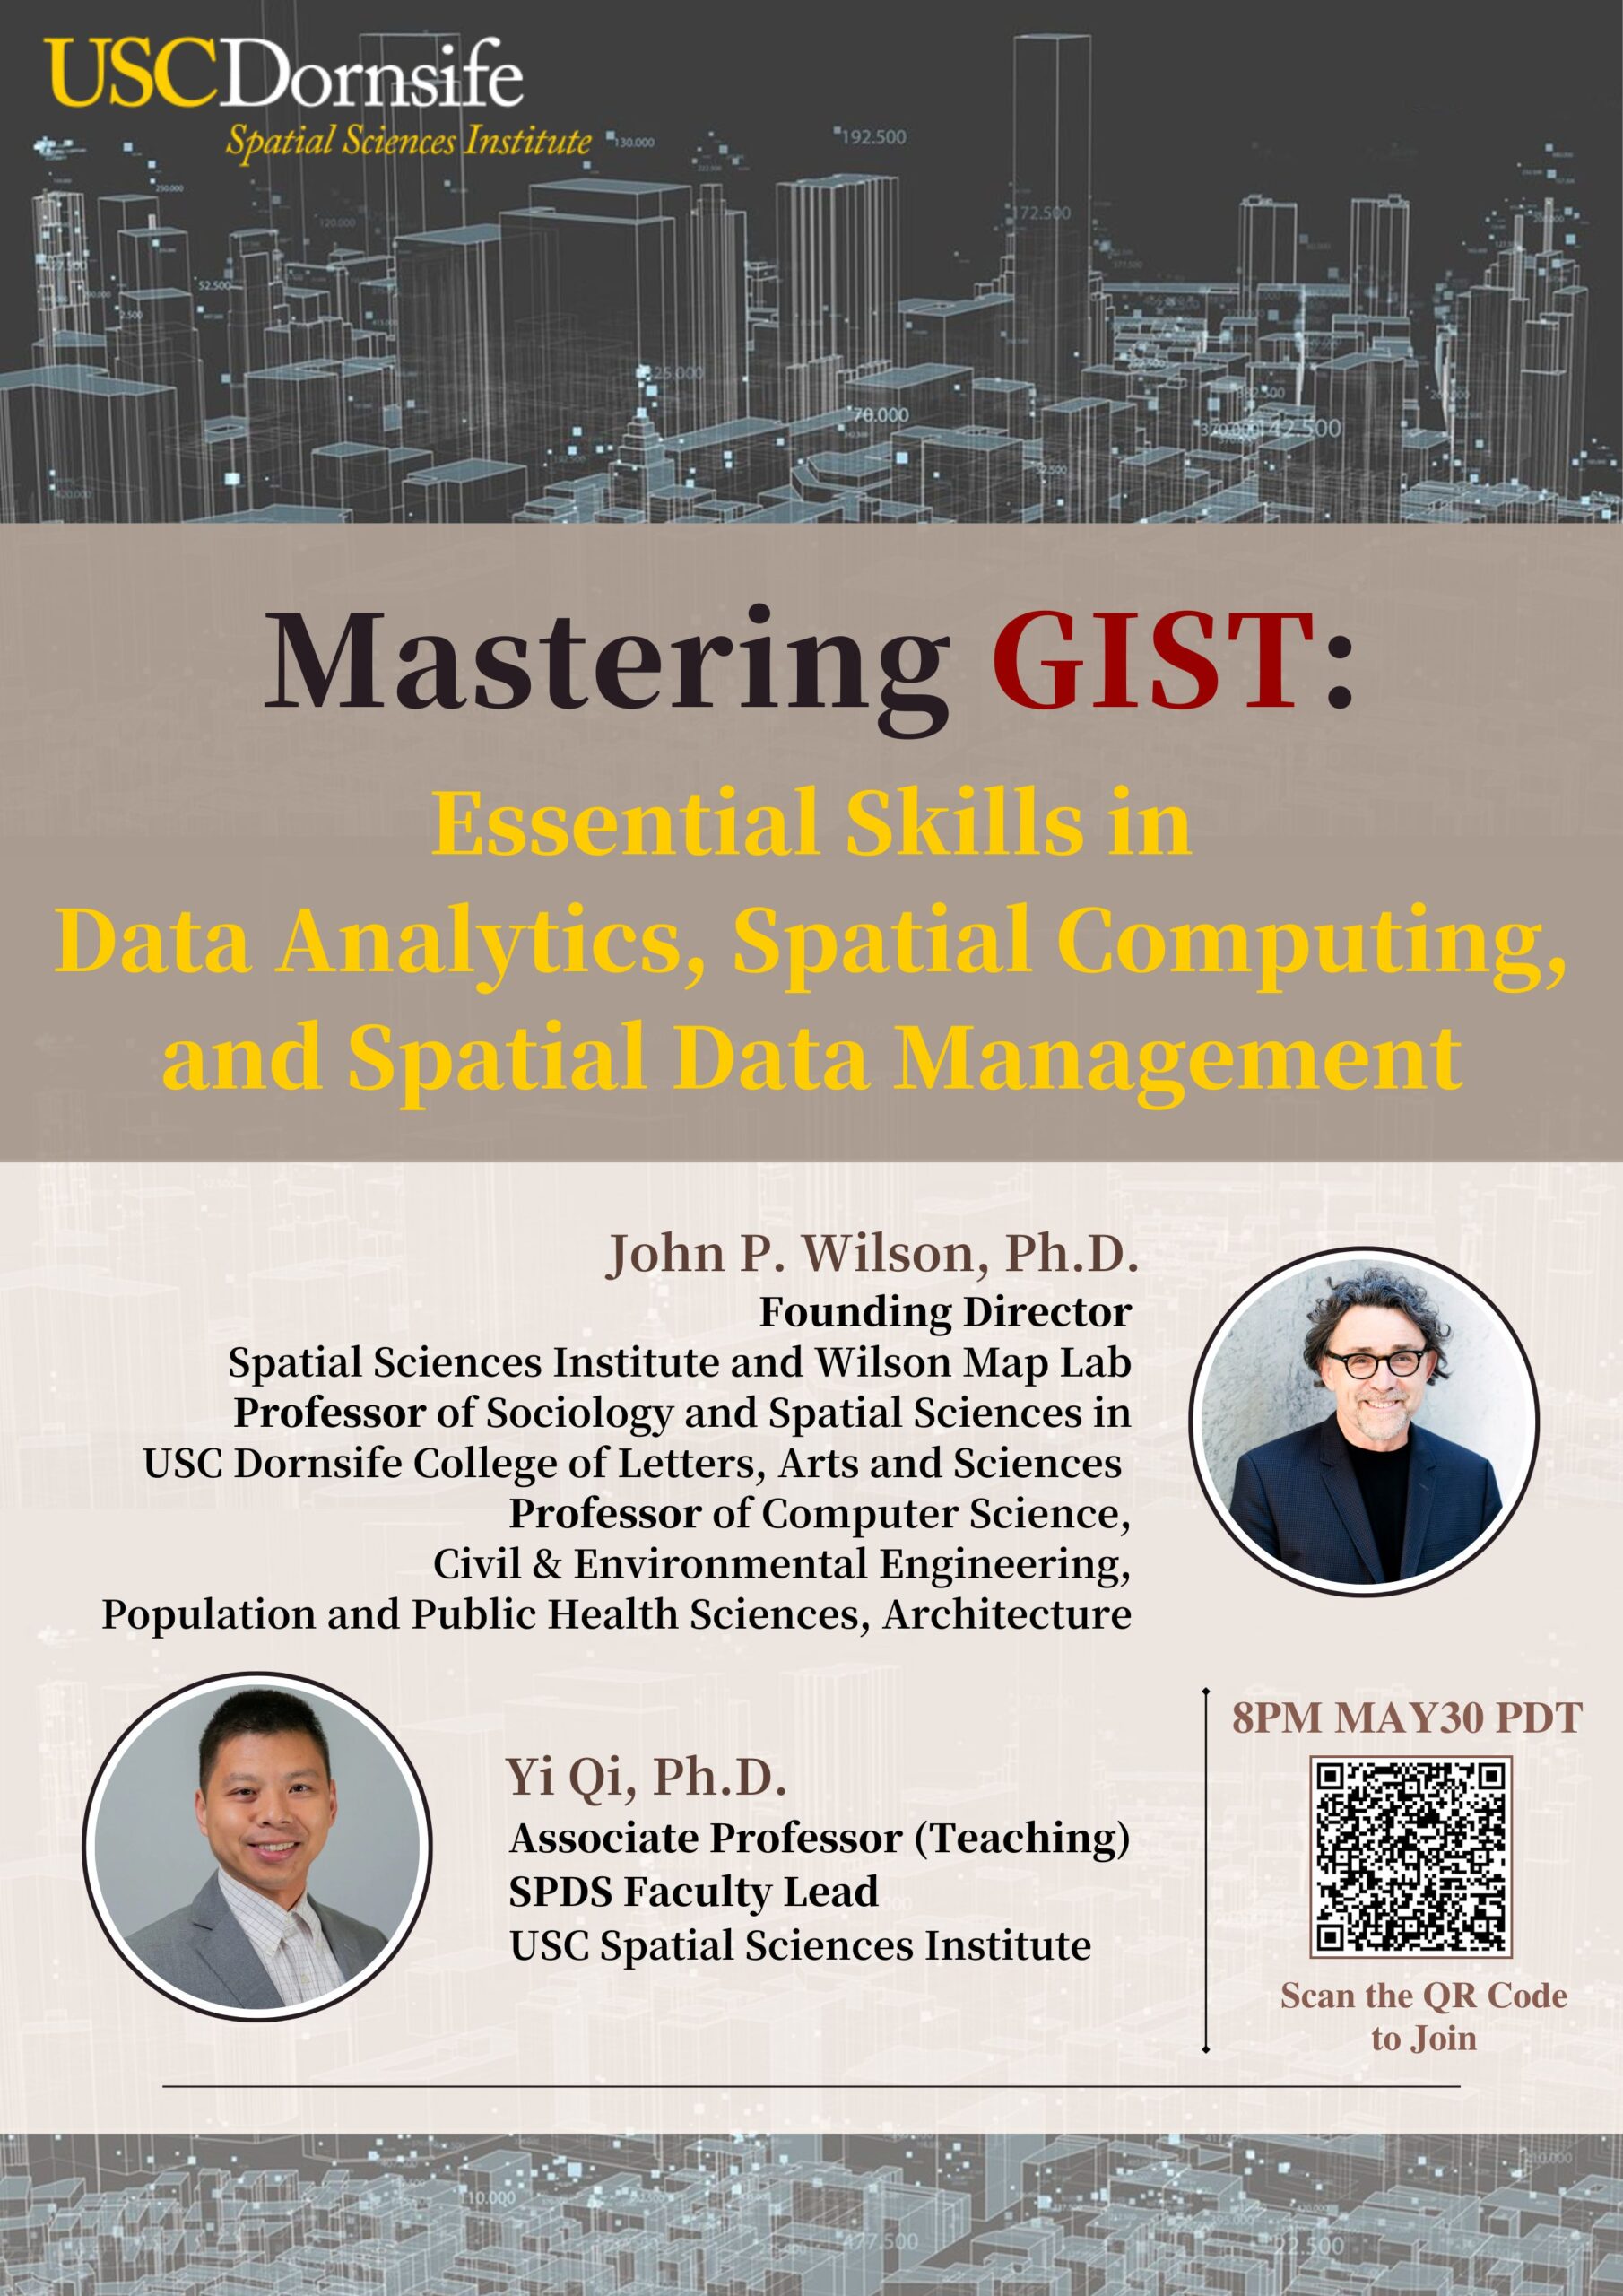 Mastering GIST: Essential Skills in Data Analytics, Spatial Computing, and Spatial Data Management